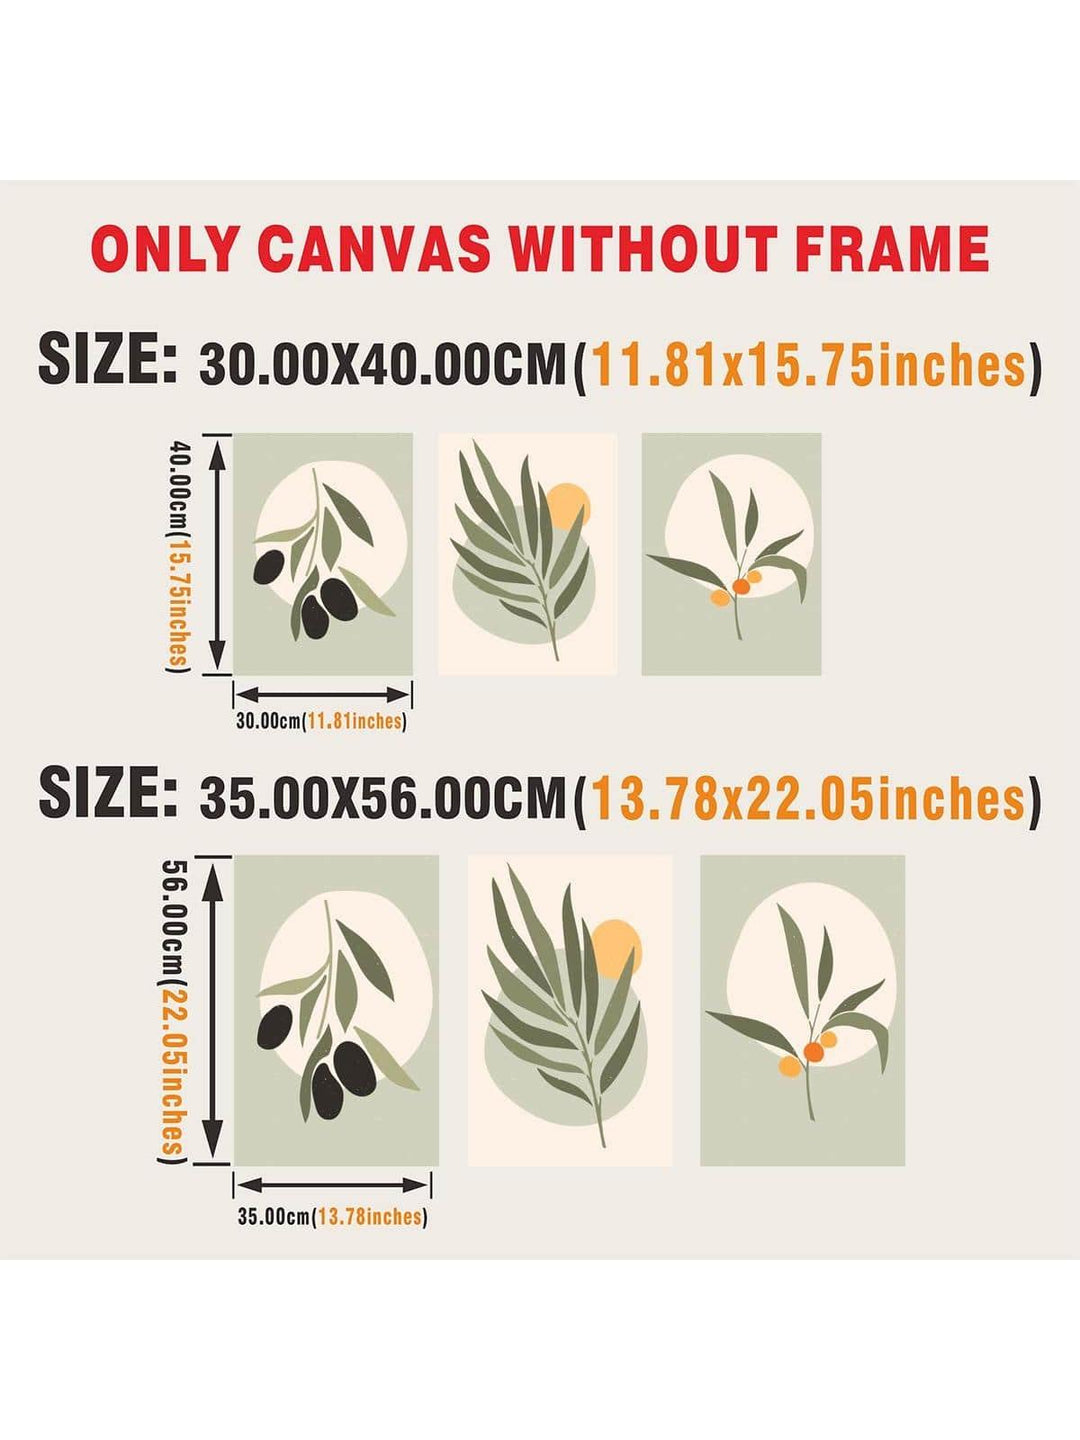 3pcs Polyester Unframed Painting Floral Pattern Unframed Picture For Home - Brand My Case